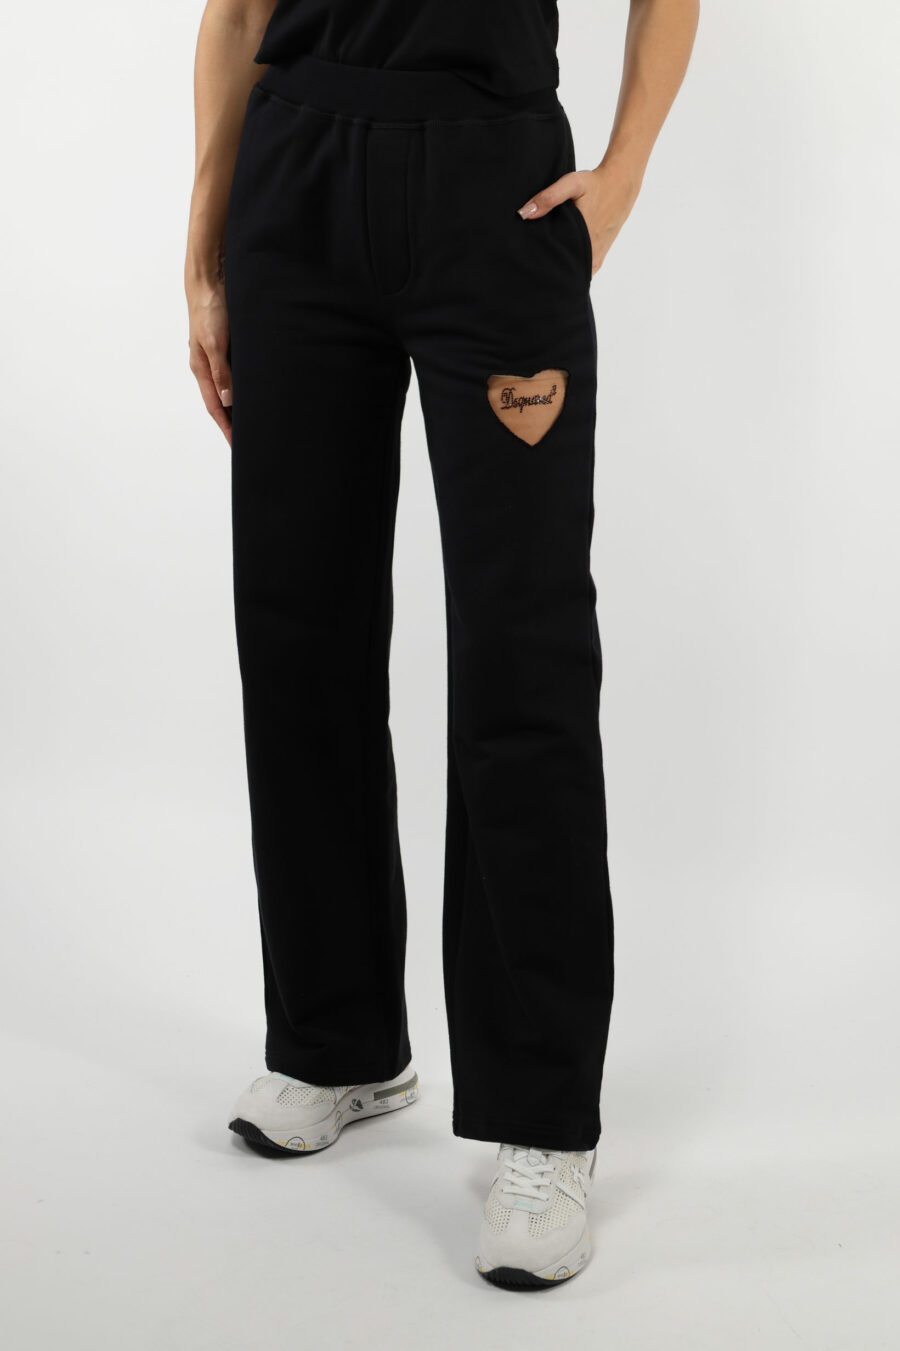 Black trousers with transparent heart logo - 109778